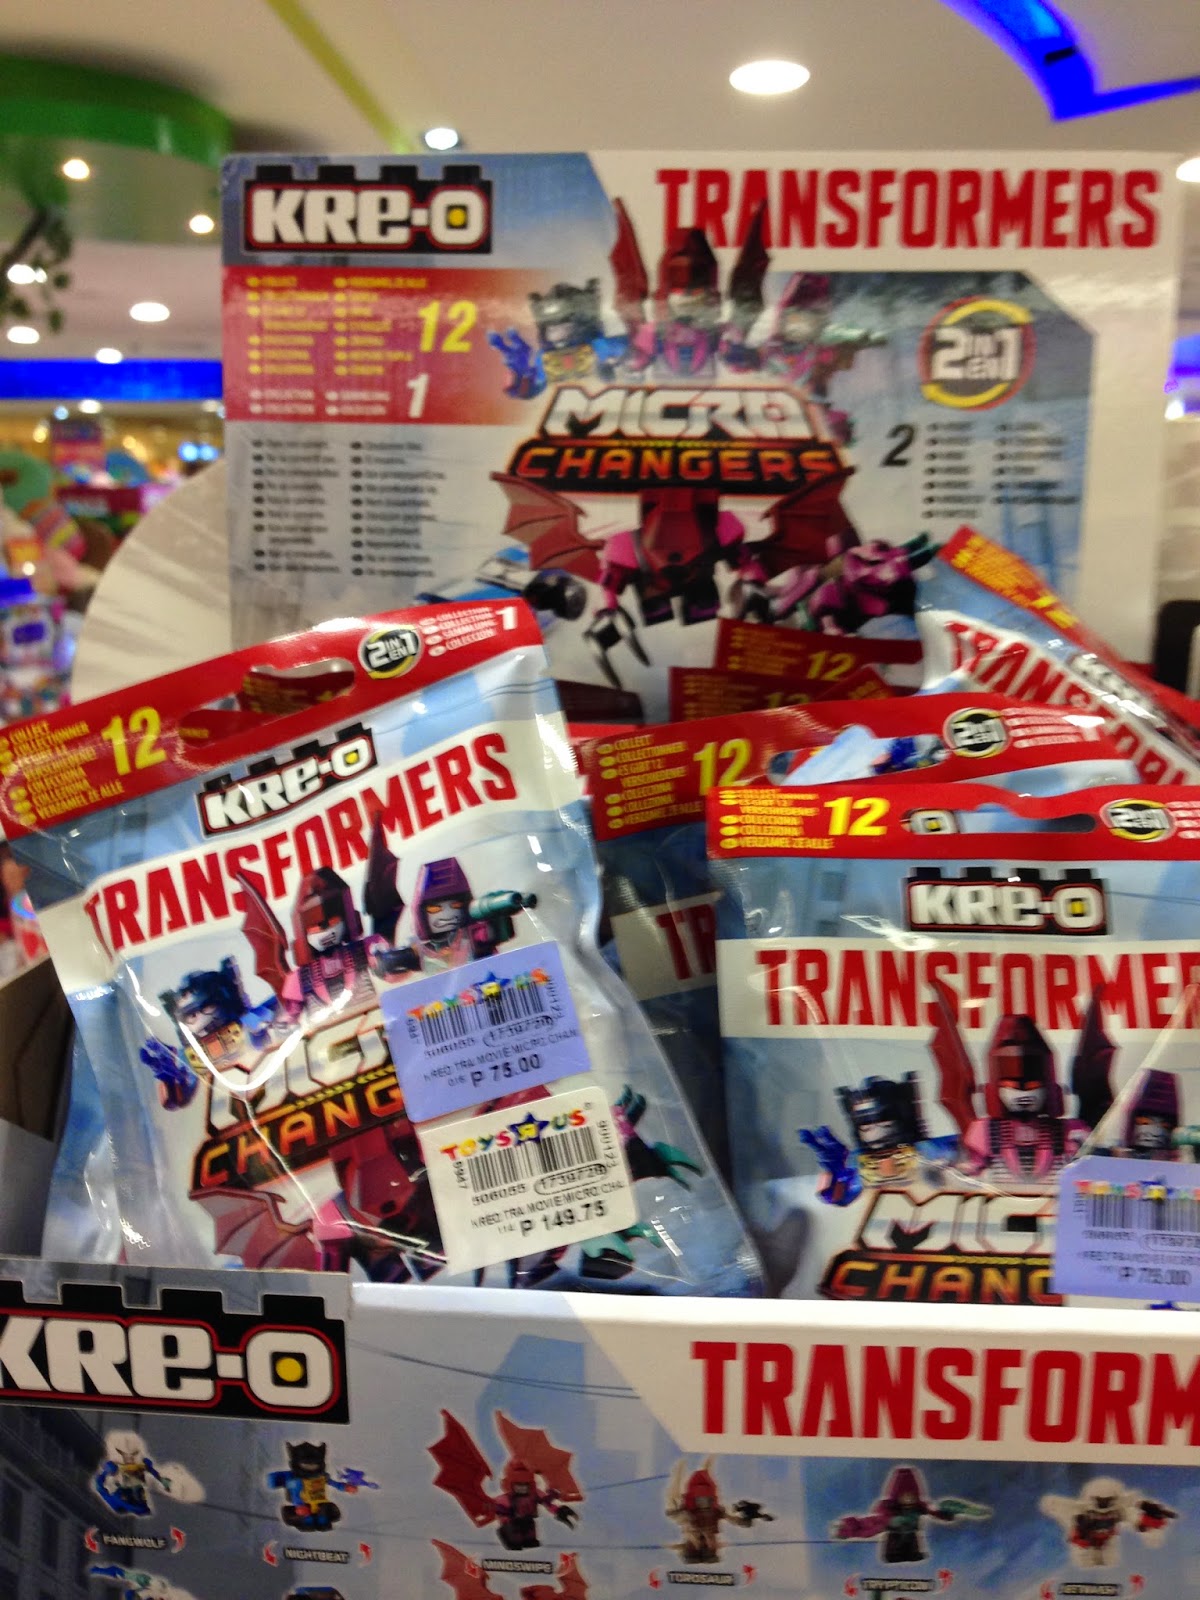 Toy Sale in Manila, Philippines 2015 : Kre-o Transformers Micro Changers Surprise Toys on SALE